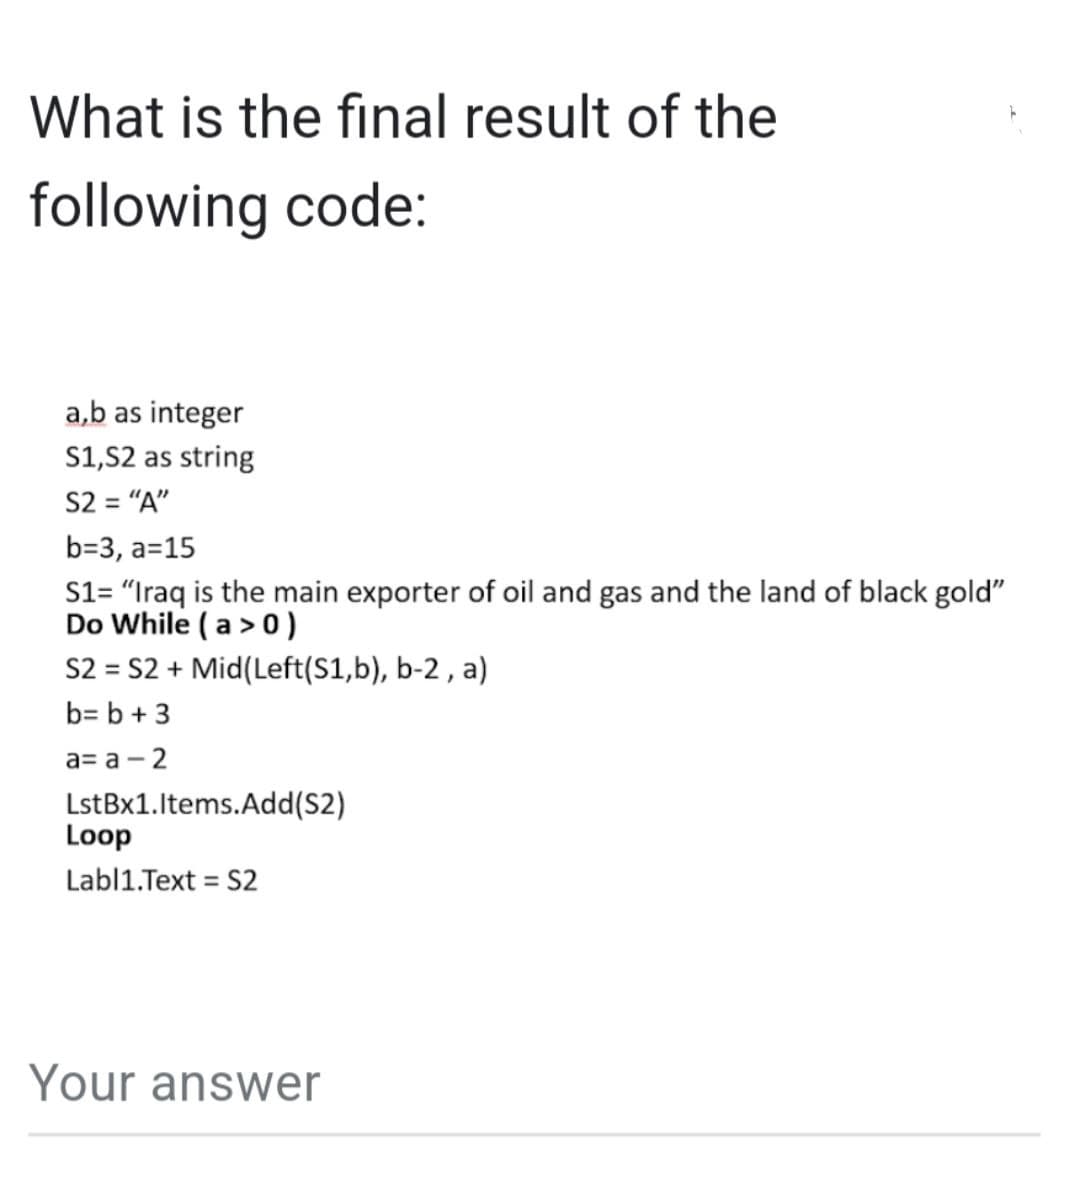 What is the final result of the
following code:
a,b as integer
S1,S2 as string
S2 = "A"
b=3, a=15
S1= "Iraq is the main exporter of oil and gas and the land of black gold"
Do While (a > 0)
S2 = S2 + Mid(Left(S1,b), b-2, a)
b= b + 3
a= a -2
LstBx1.Items.Add(S2)
Loop
Labl1.Text = S2
Your answer
h